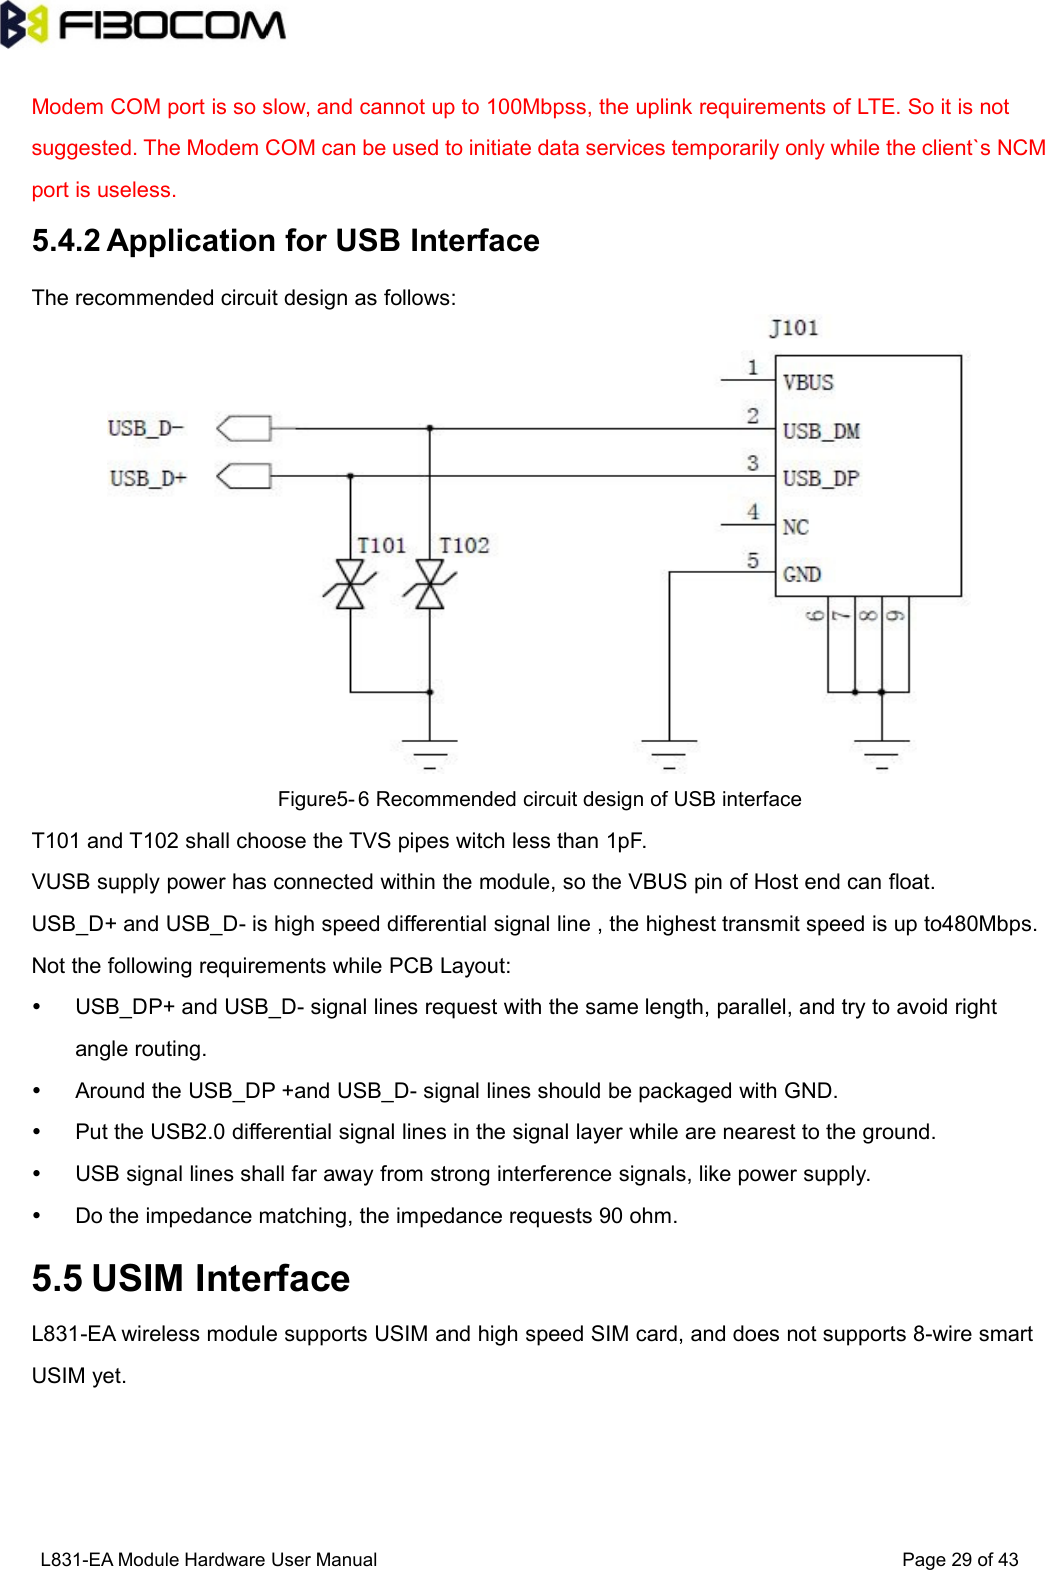 L831-EA Module Hardware User Manual Page29of43Modem COM port is so slow, and cannot up to 100Mbpss, the uplink requirements of LTE. So it is notsuggested. The Modem COM can be used to initiate data services temporarily only while the client`s NCMport is useless.5.4.2 Application for USB InterfaceThe recommended circuit design as follows:Figure5- 6 Recommended circuit design of USB interfaceT101 and T102 shall choose the TVS pipes witch less than 1pF.VUSB supply power has connected within the module, so the VBUS pin of Host end can float.USB_D+ and USB_D- is high speed differential signal line , the highest transmit speed is up to480Mbps.Not the following requirements while PCB Layout:USB_DP+ and USB_D- signal lines request with the same length, parallel, and try to avoid rightangle routing.Around the USB_DP +and USB_D- signal lines should be packaged with GND.Put the USB2.0 differential signal lines in the signal layer while are nearest to the ground.USB signal lines shall far away from strong interference signals, like power supply.Do the impedance matching, the impedance requests 90 ohm.5.5 USIM InterfaceL831-EA wireless module supports USIM and high speed SIM card, and does not supports 8-wire smartUSIM yet.